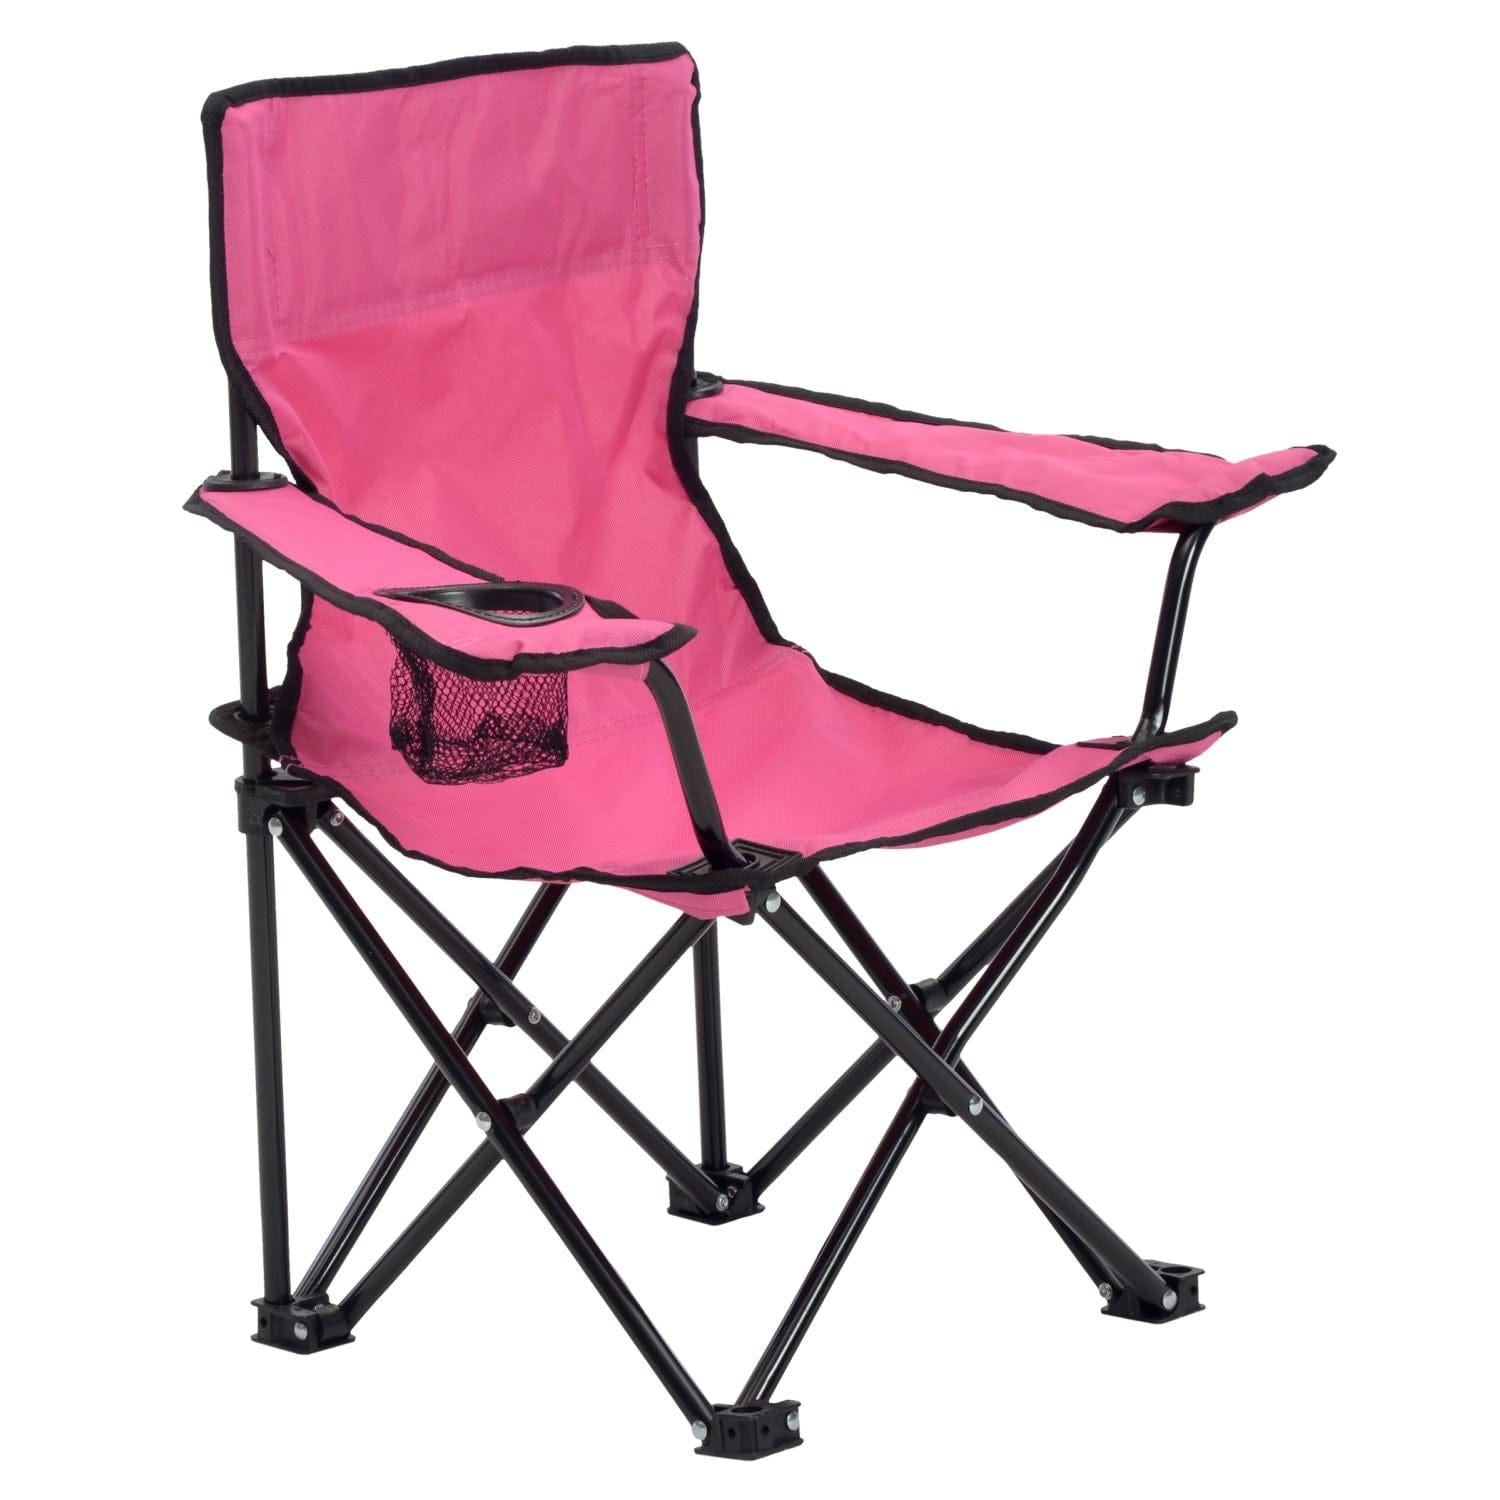 The Fulfiller Portable Chairs Quik Chair | Kid's Folding Chair - Pink 167562DS